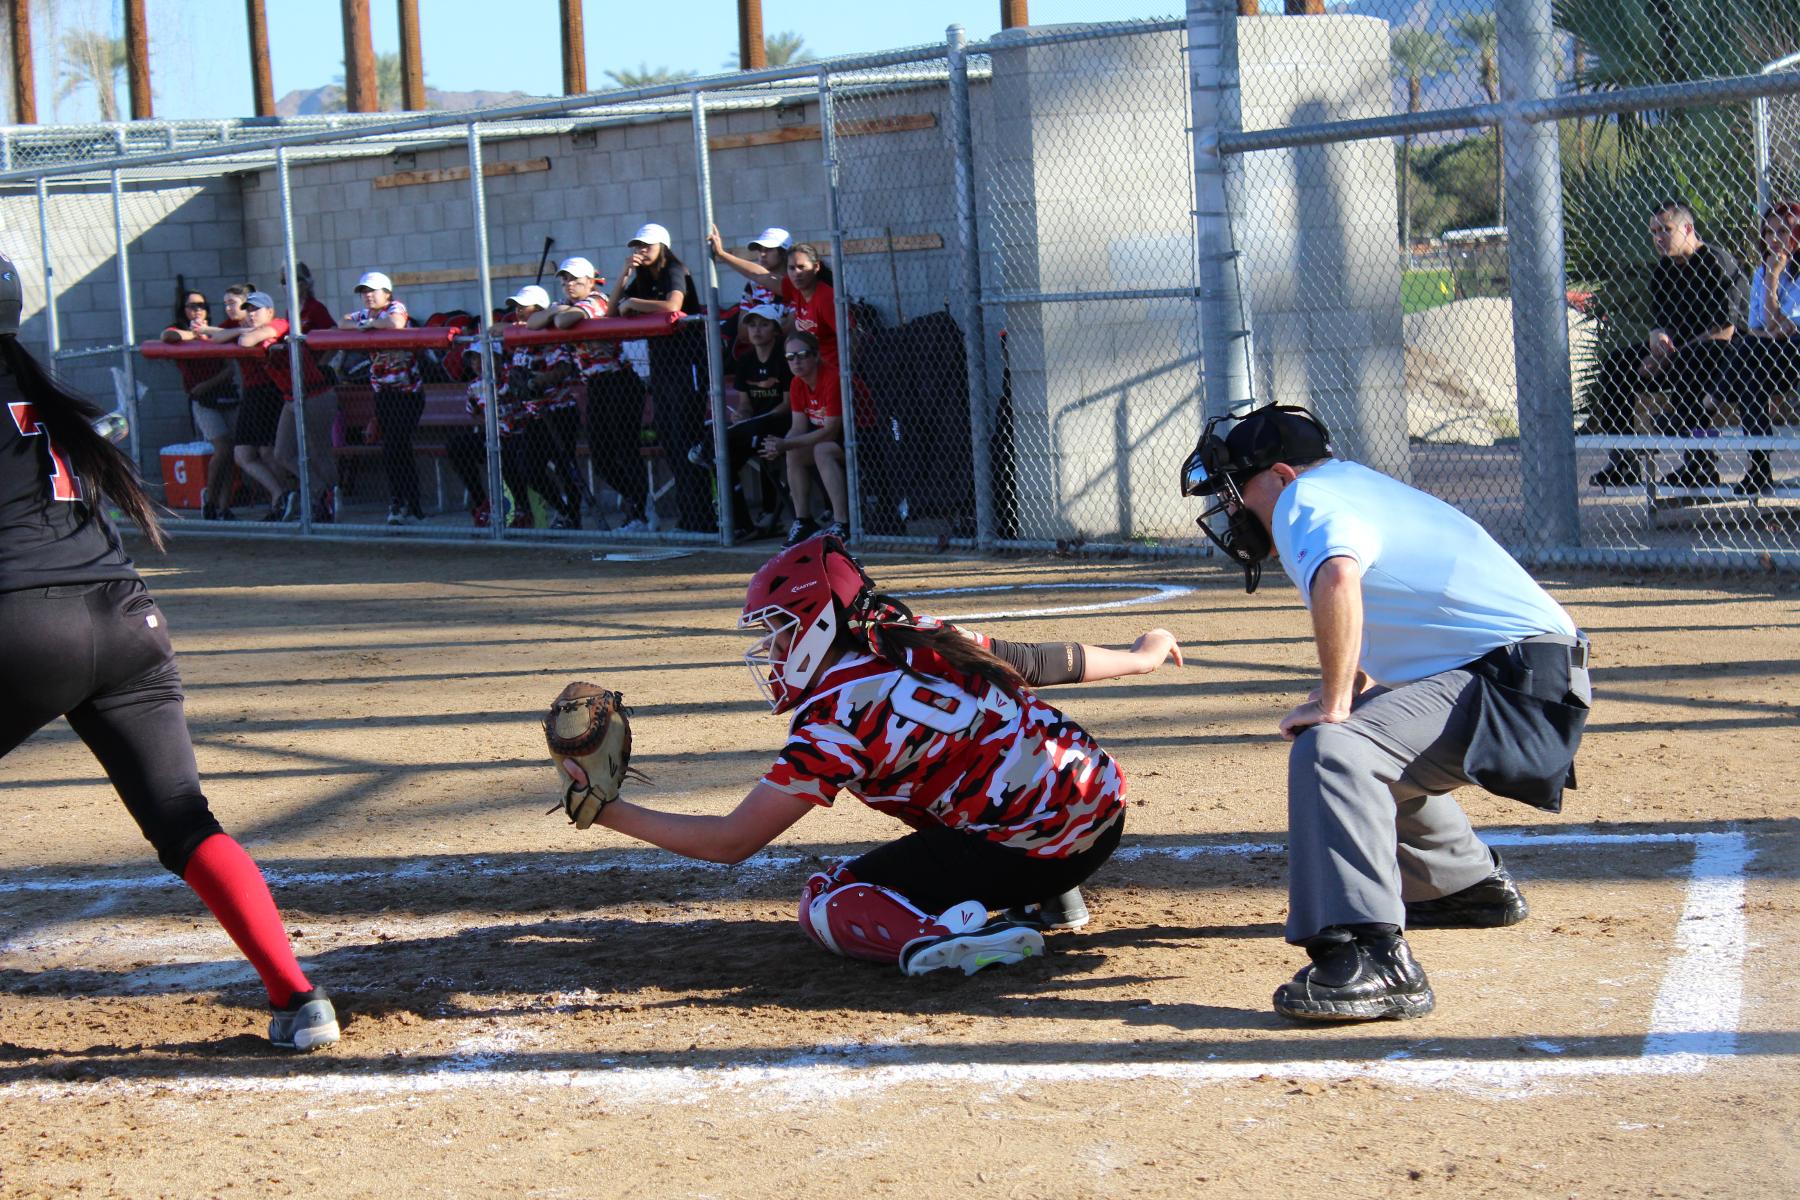 Softball Earns Second Consecutive Win in Defeating Barstow, 7-6